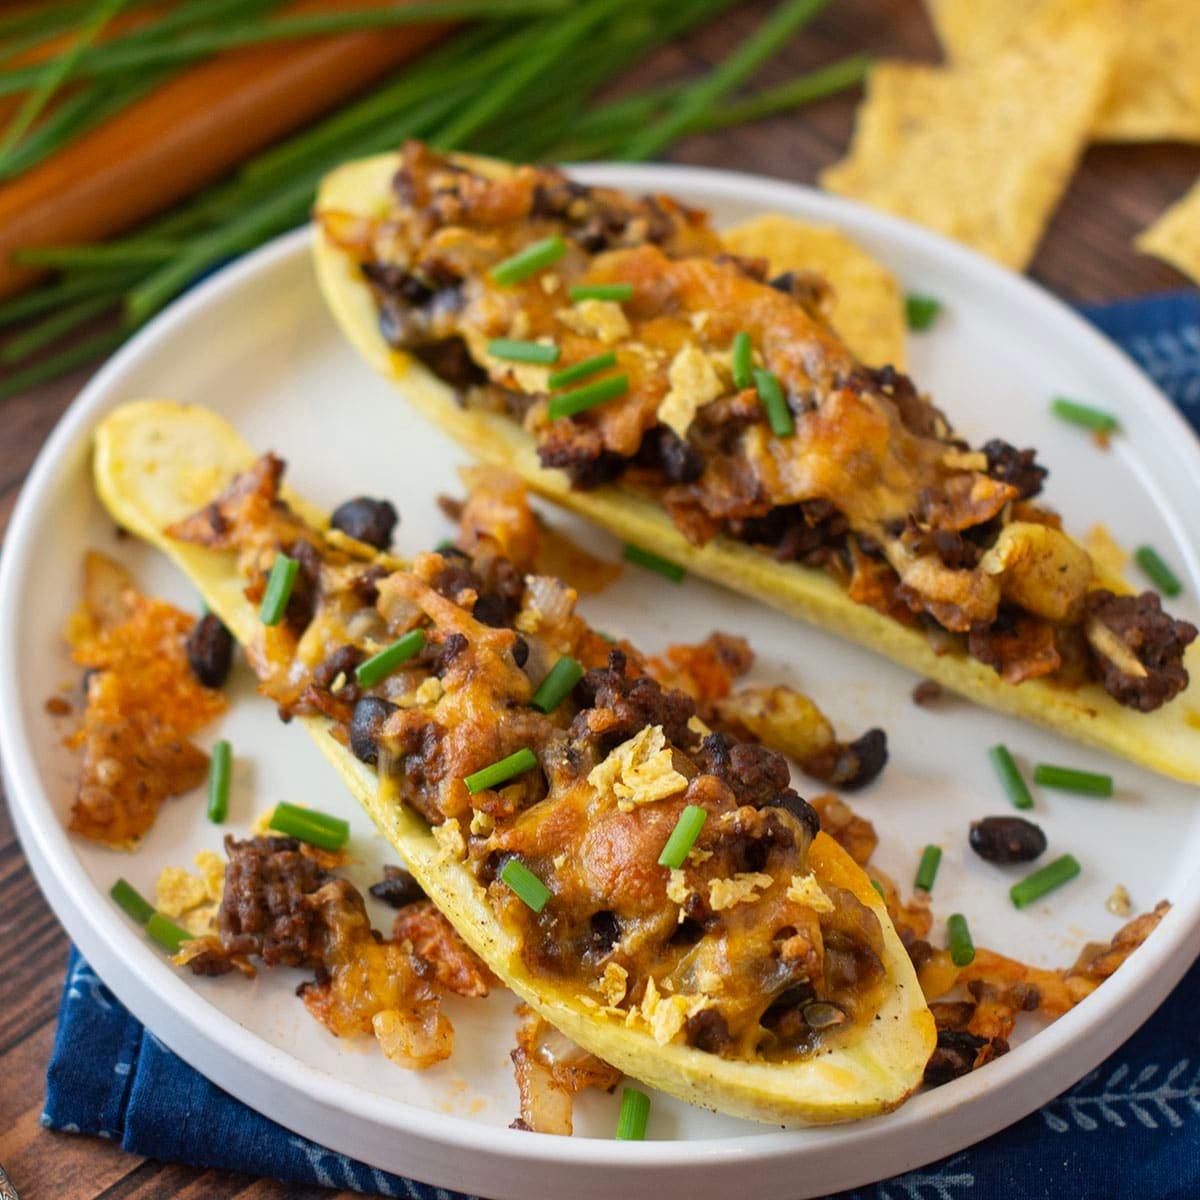 Yellow squash halves stuffed with ground beef taco mixture and topped with cheese.